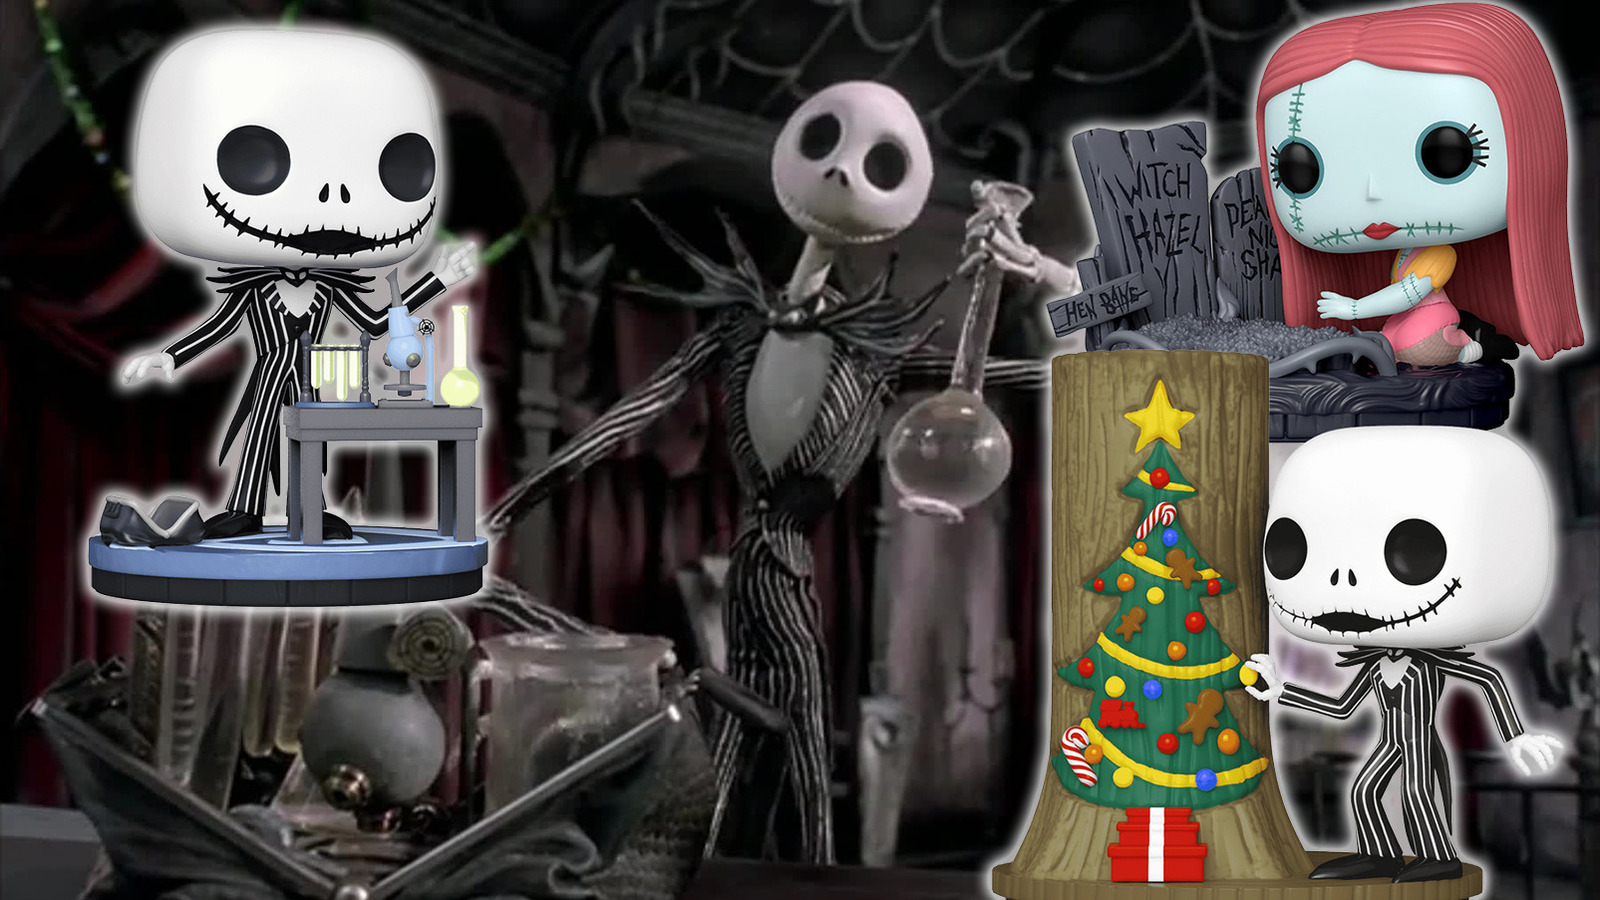 Funko POP! Moments: The Nightmare Before Christmas Snowman Jack